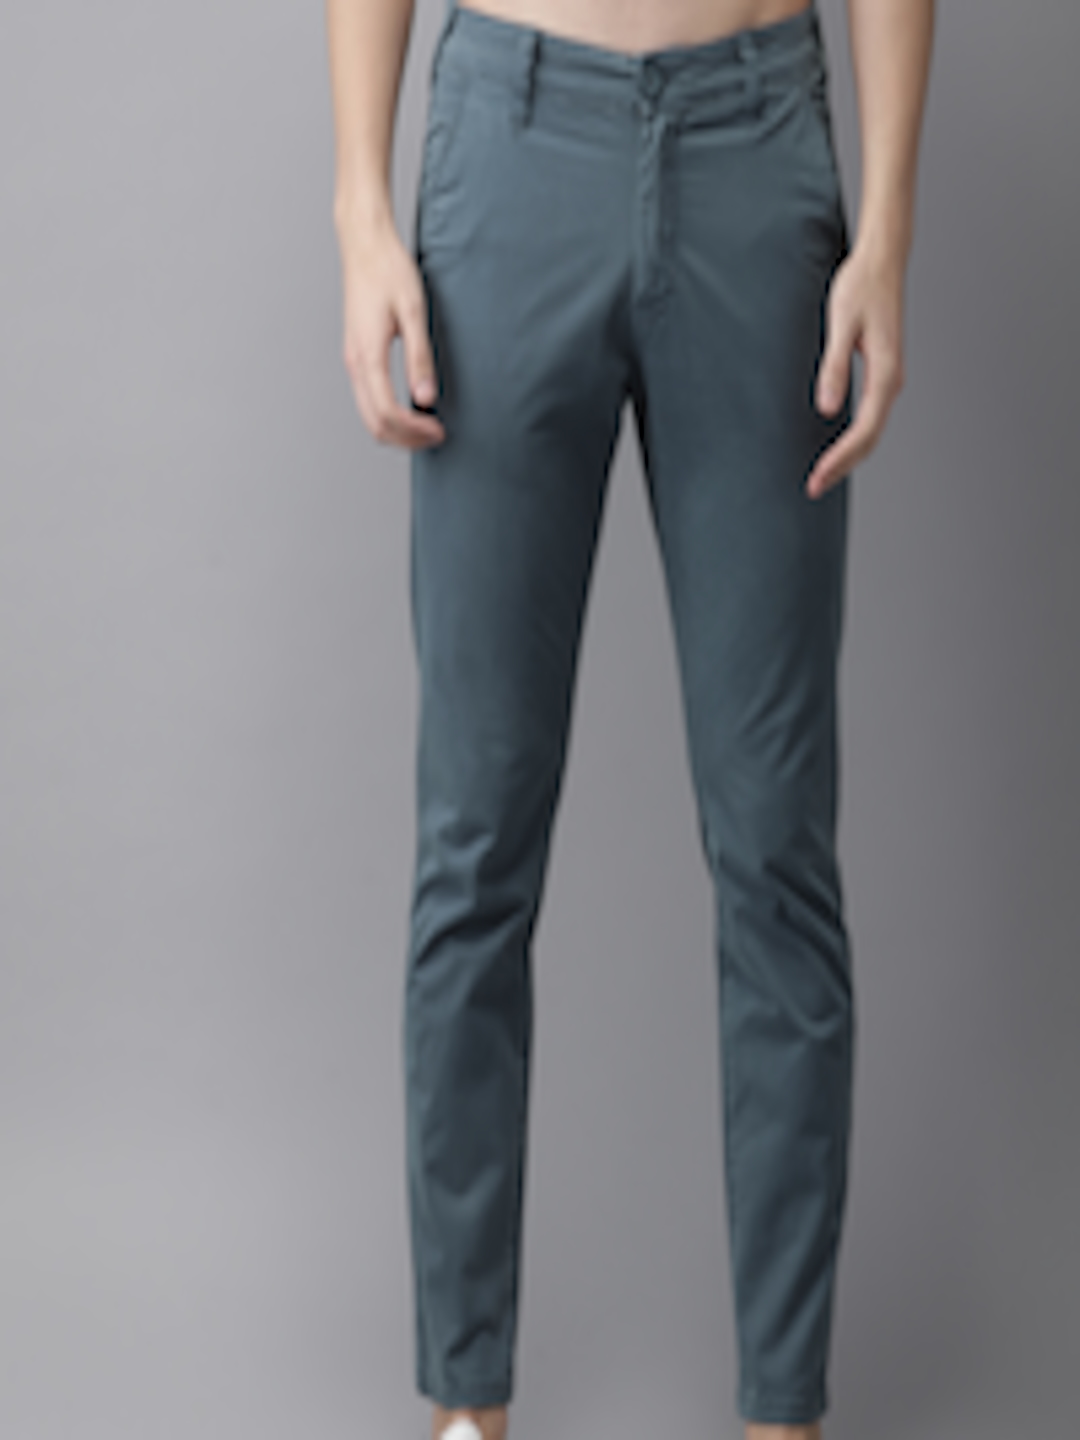 Buy HERE&NOW Men Teal Blue Slim Fit Solid Chinos - Trousers for Men ...